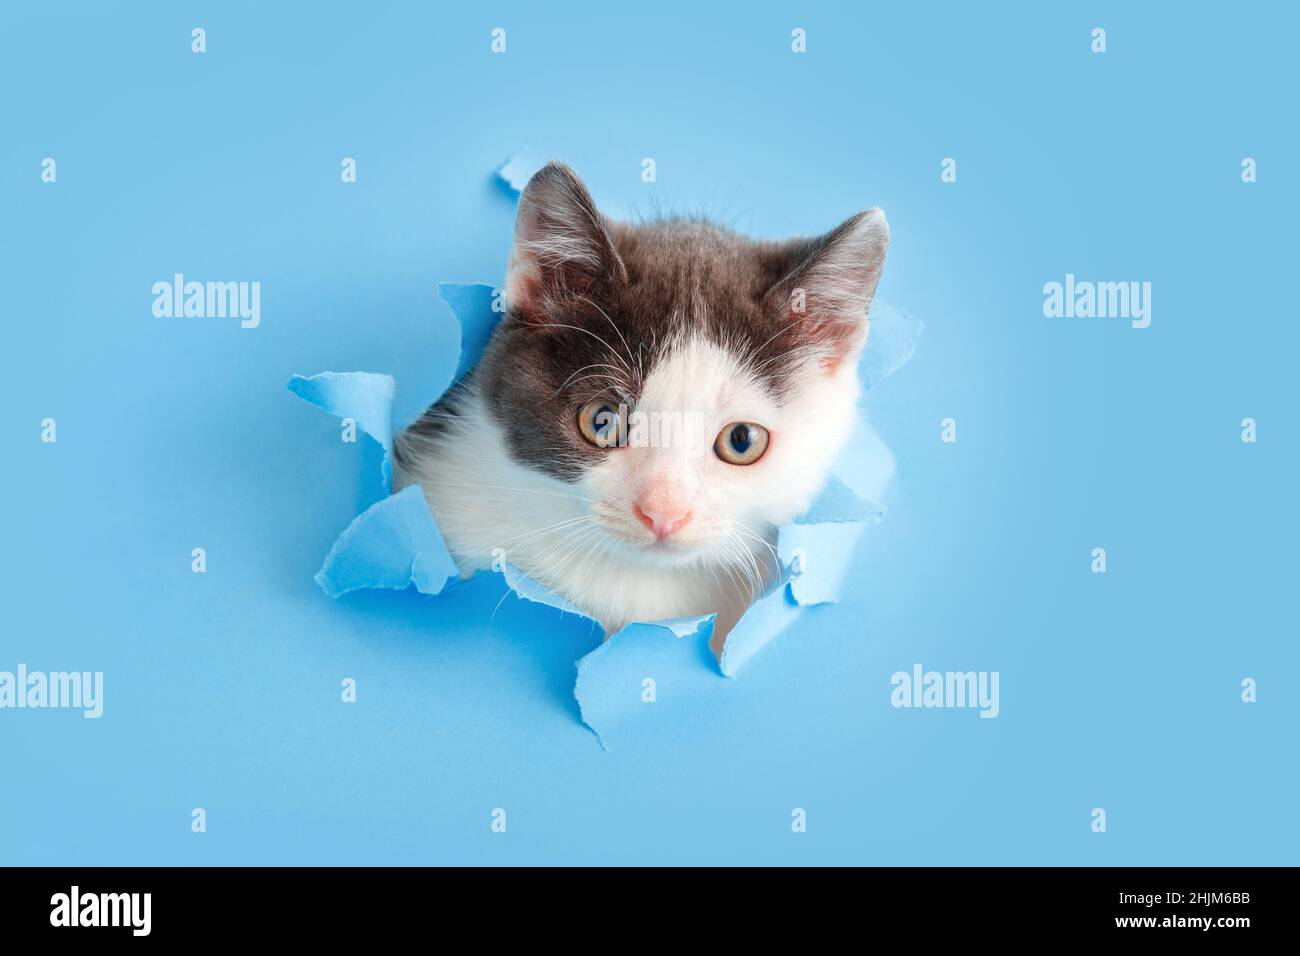 Cute white and gray kitten animal climbs out of paper hole frame isolated on blue color background. Cat pet peeks out of hole with interest. Creative Stock Photo